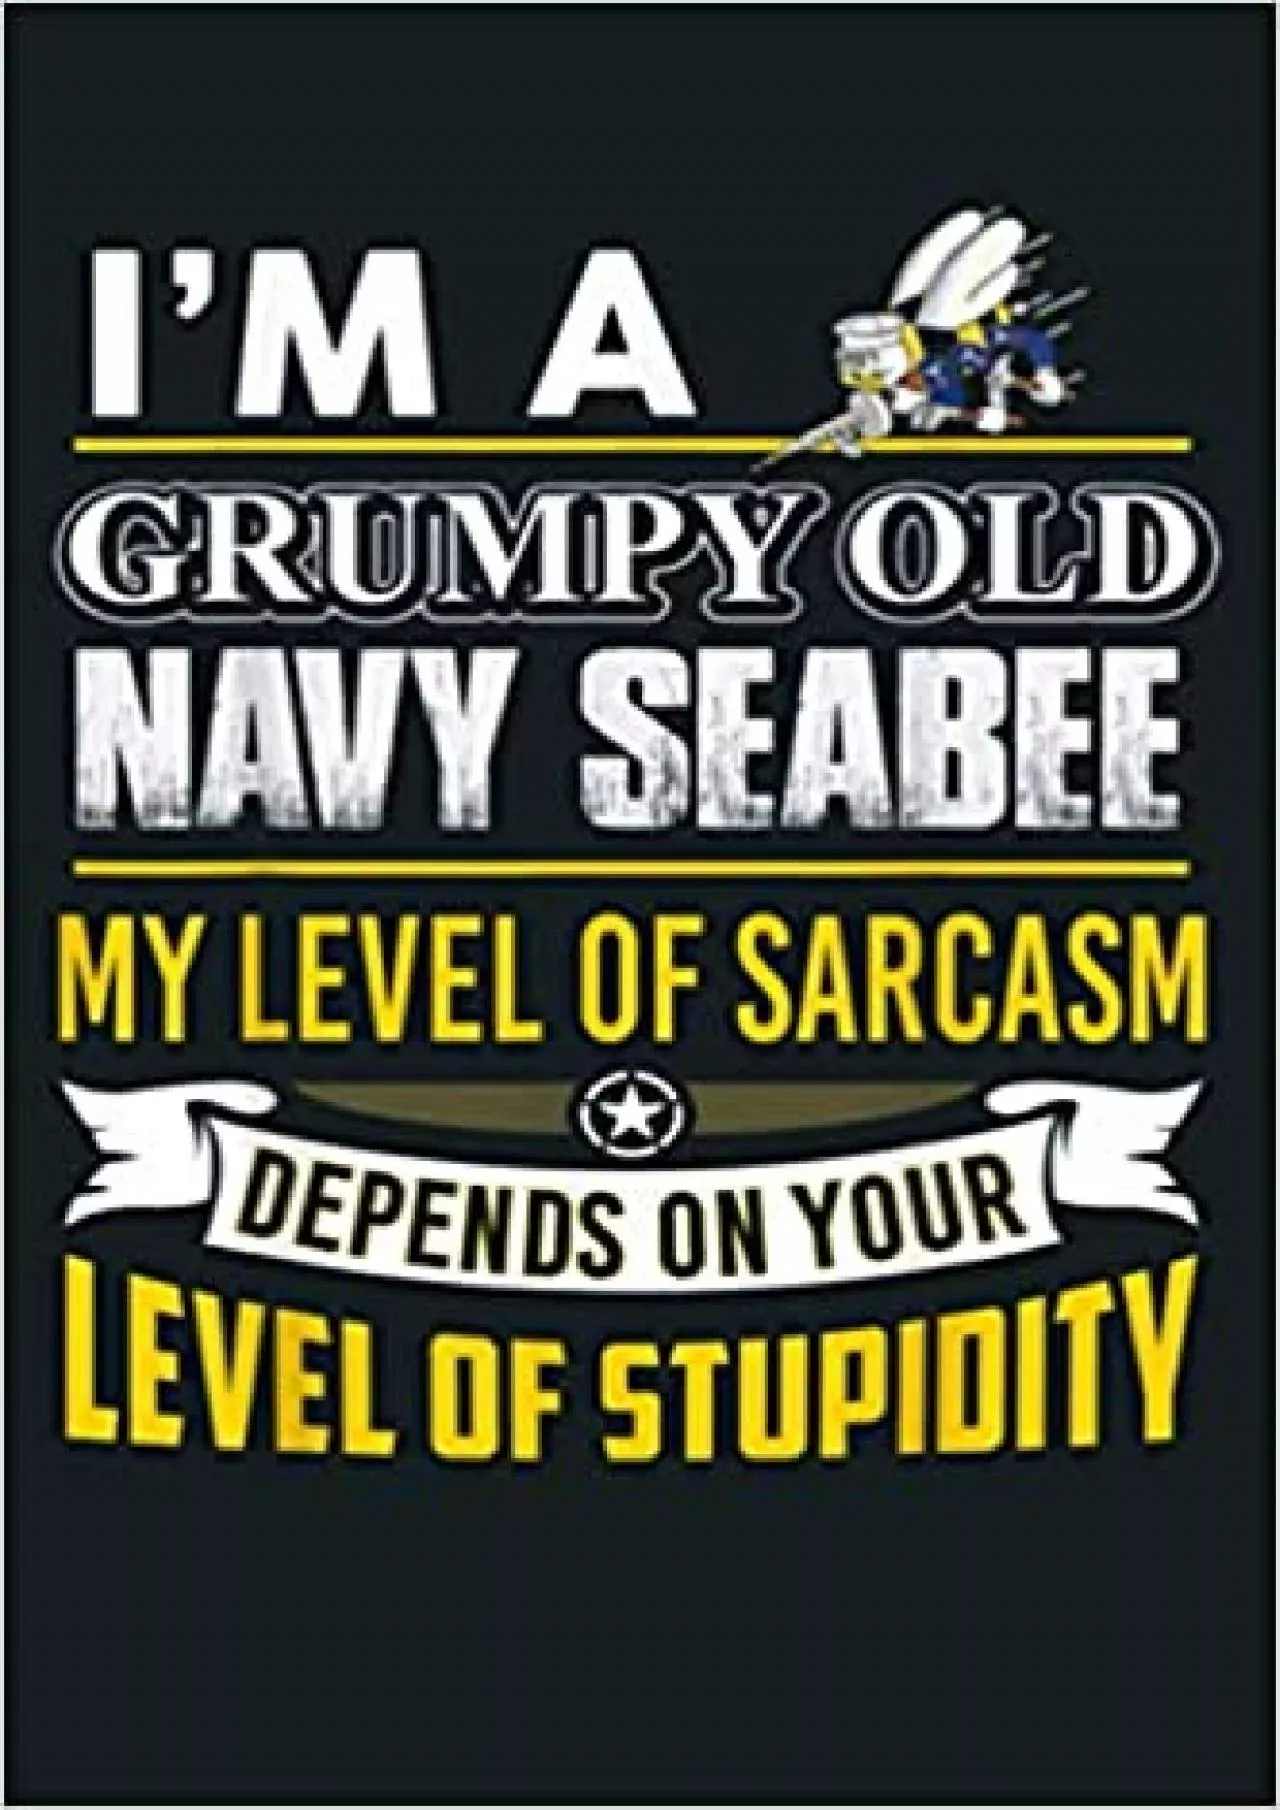 Navy Seabee I M A Grumpy Old Navy Seabee: Notebook Planner - 6x9 inch Daily Planner Journal